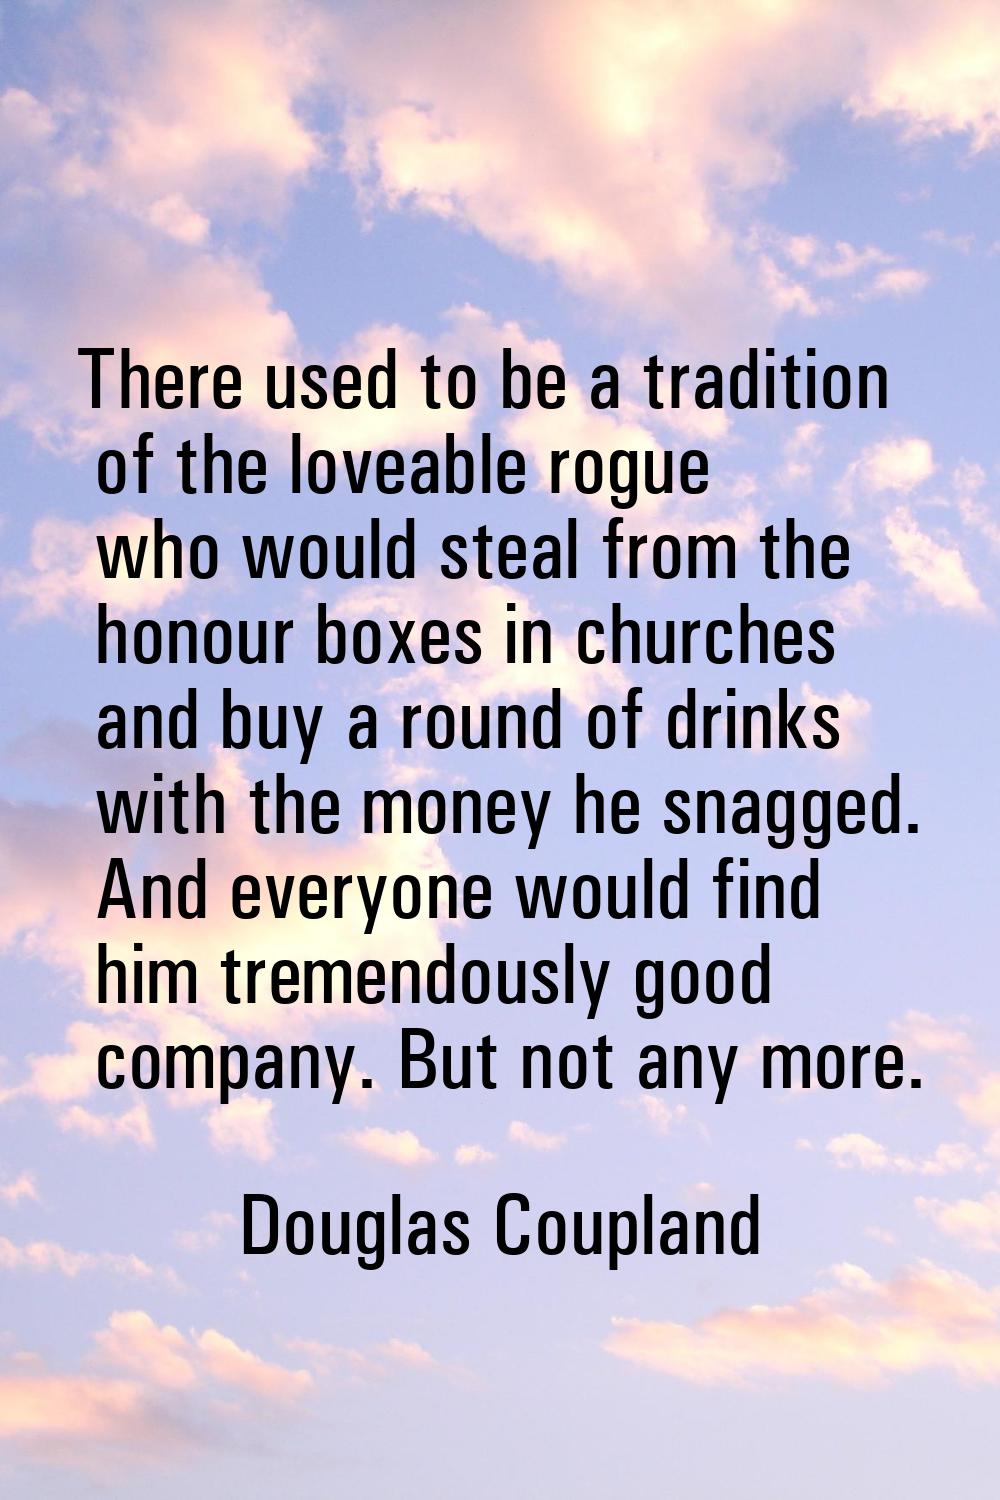 There used to be a tradition of the loveable rogue who would steal from the honour boxes in churche